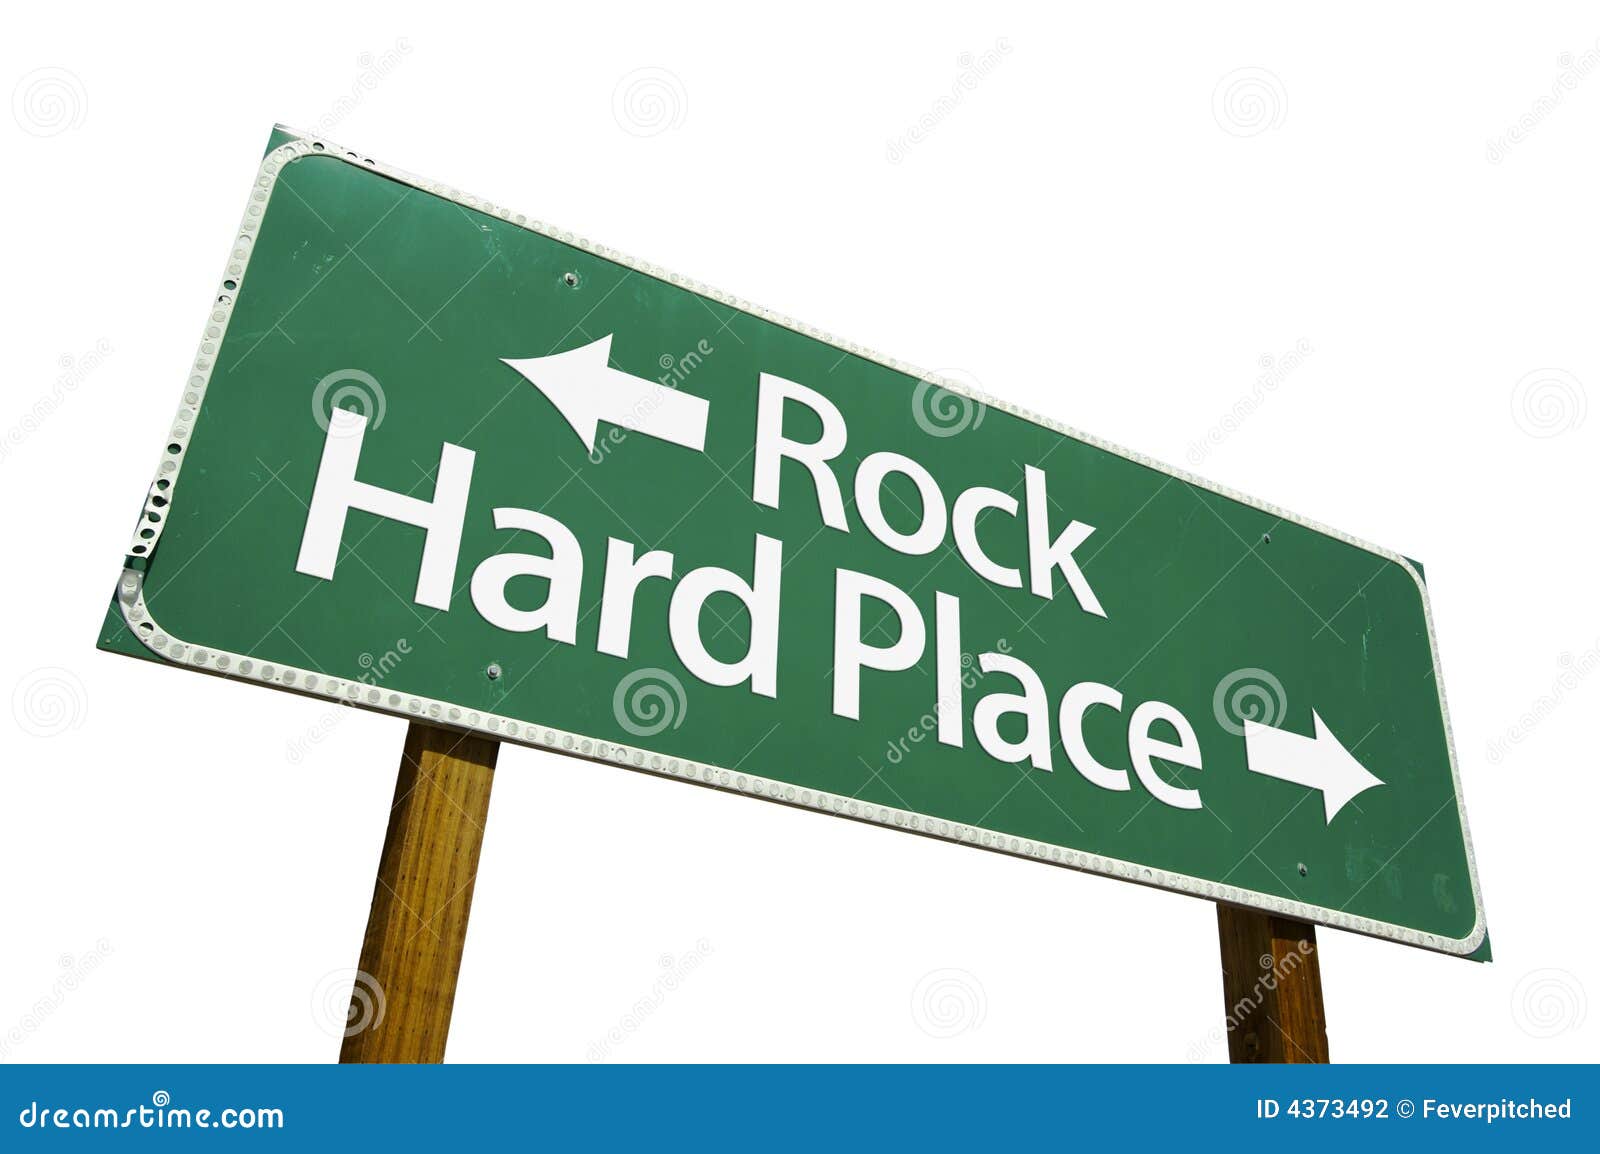 rock, hard place road sign